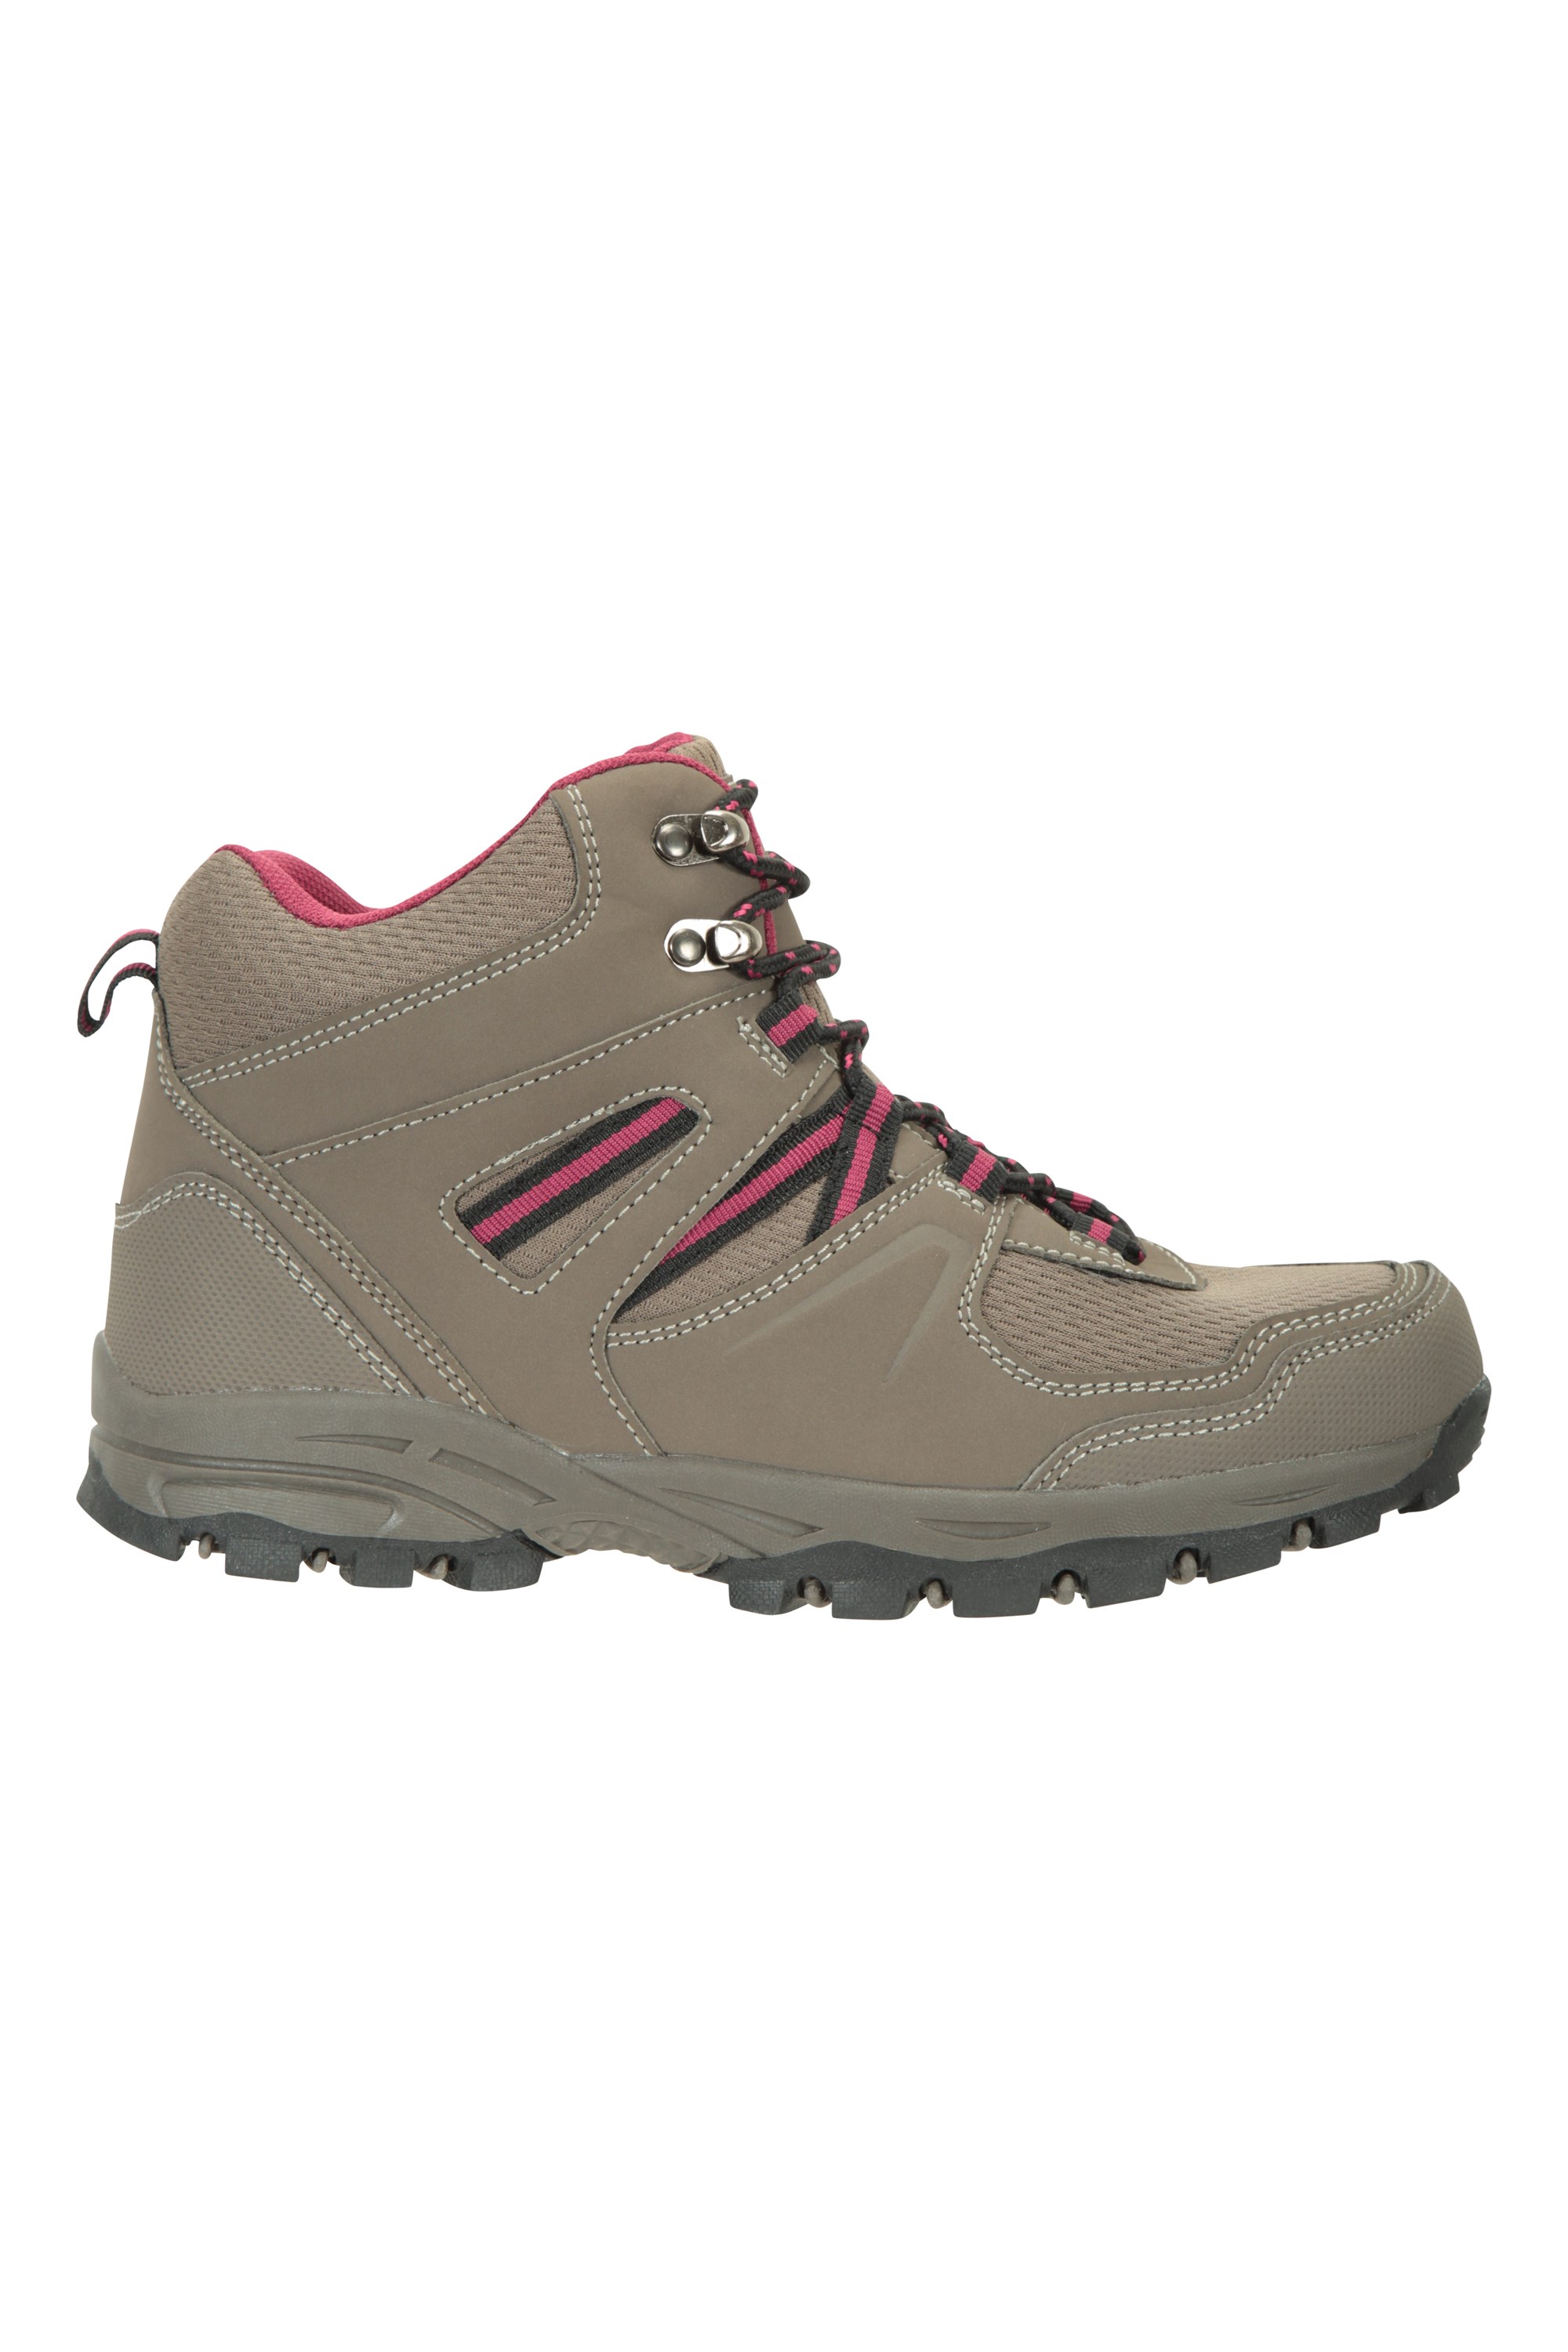 Ideal for Trekking & Travelling Padded & Lightweight Walking Shoes Breathable Ankle Boots Mountain Warehouse McLeod Womens Comfortable Boots Durable Hiking Boots 